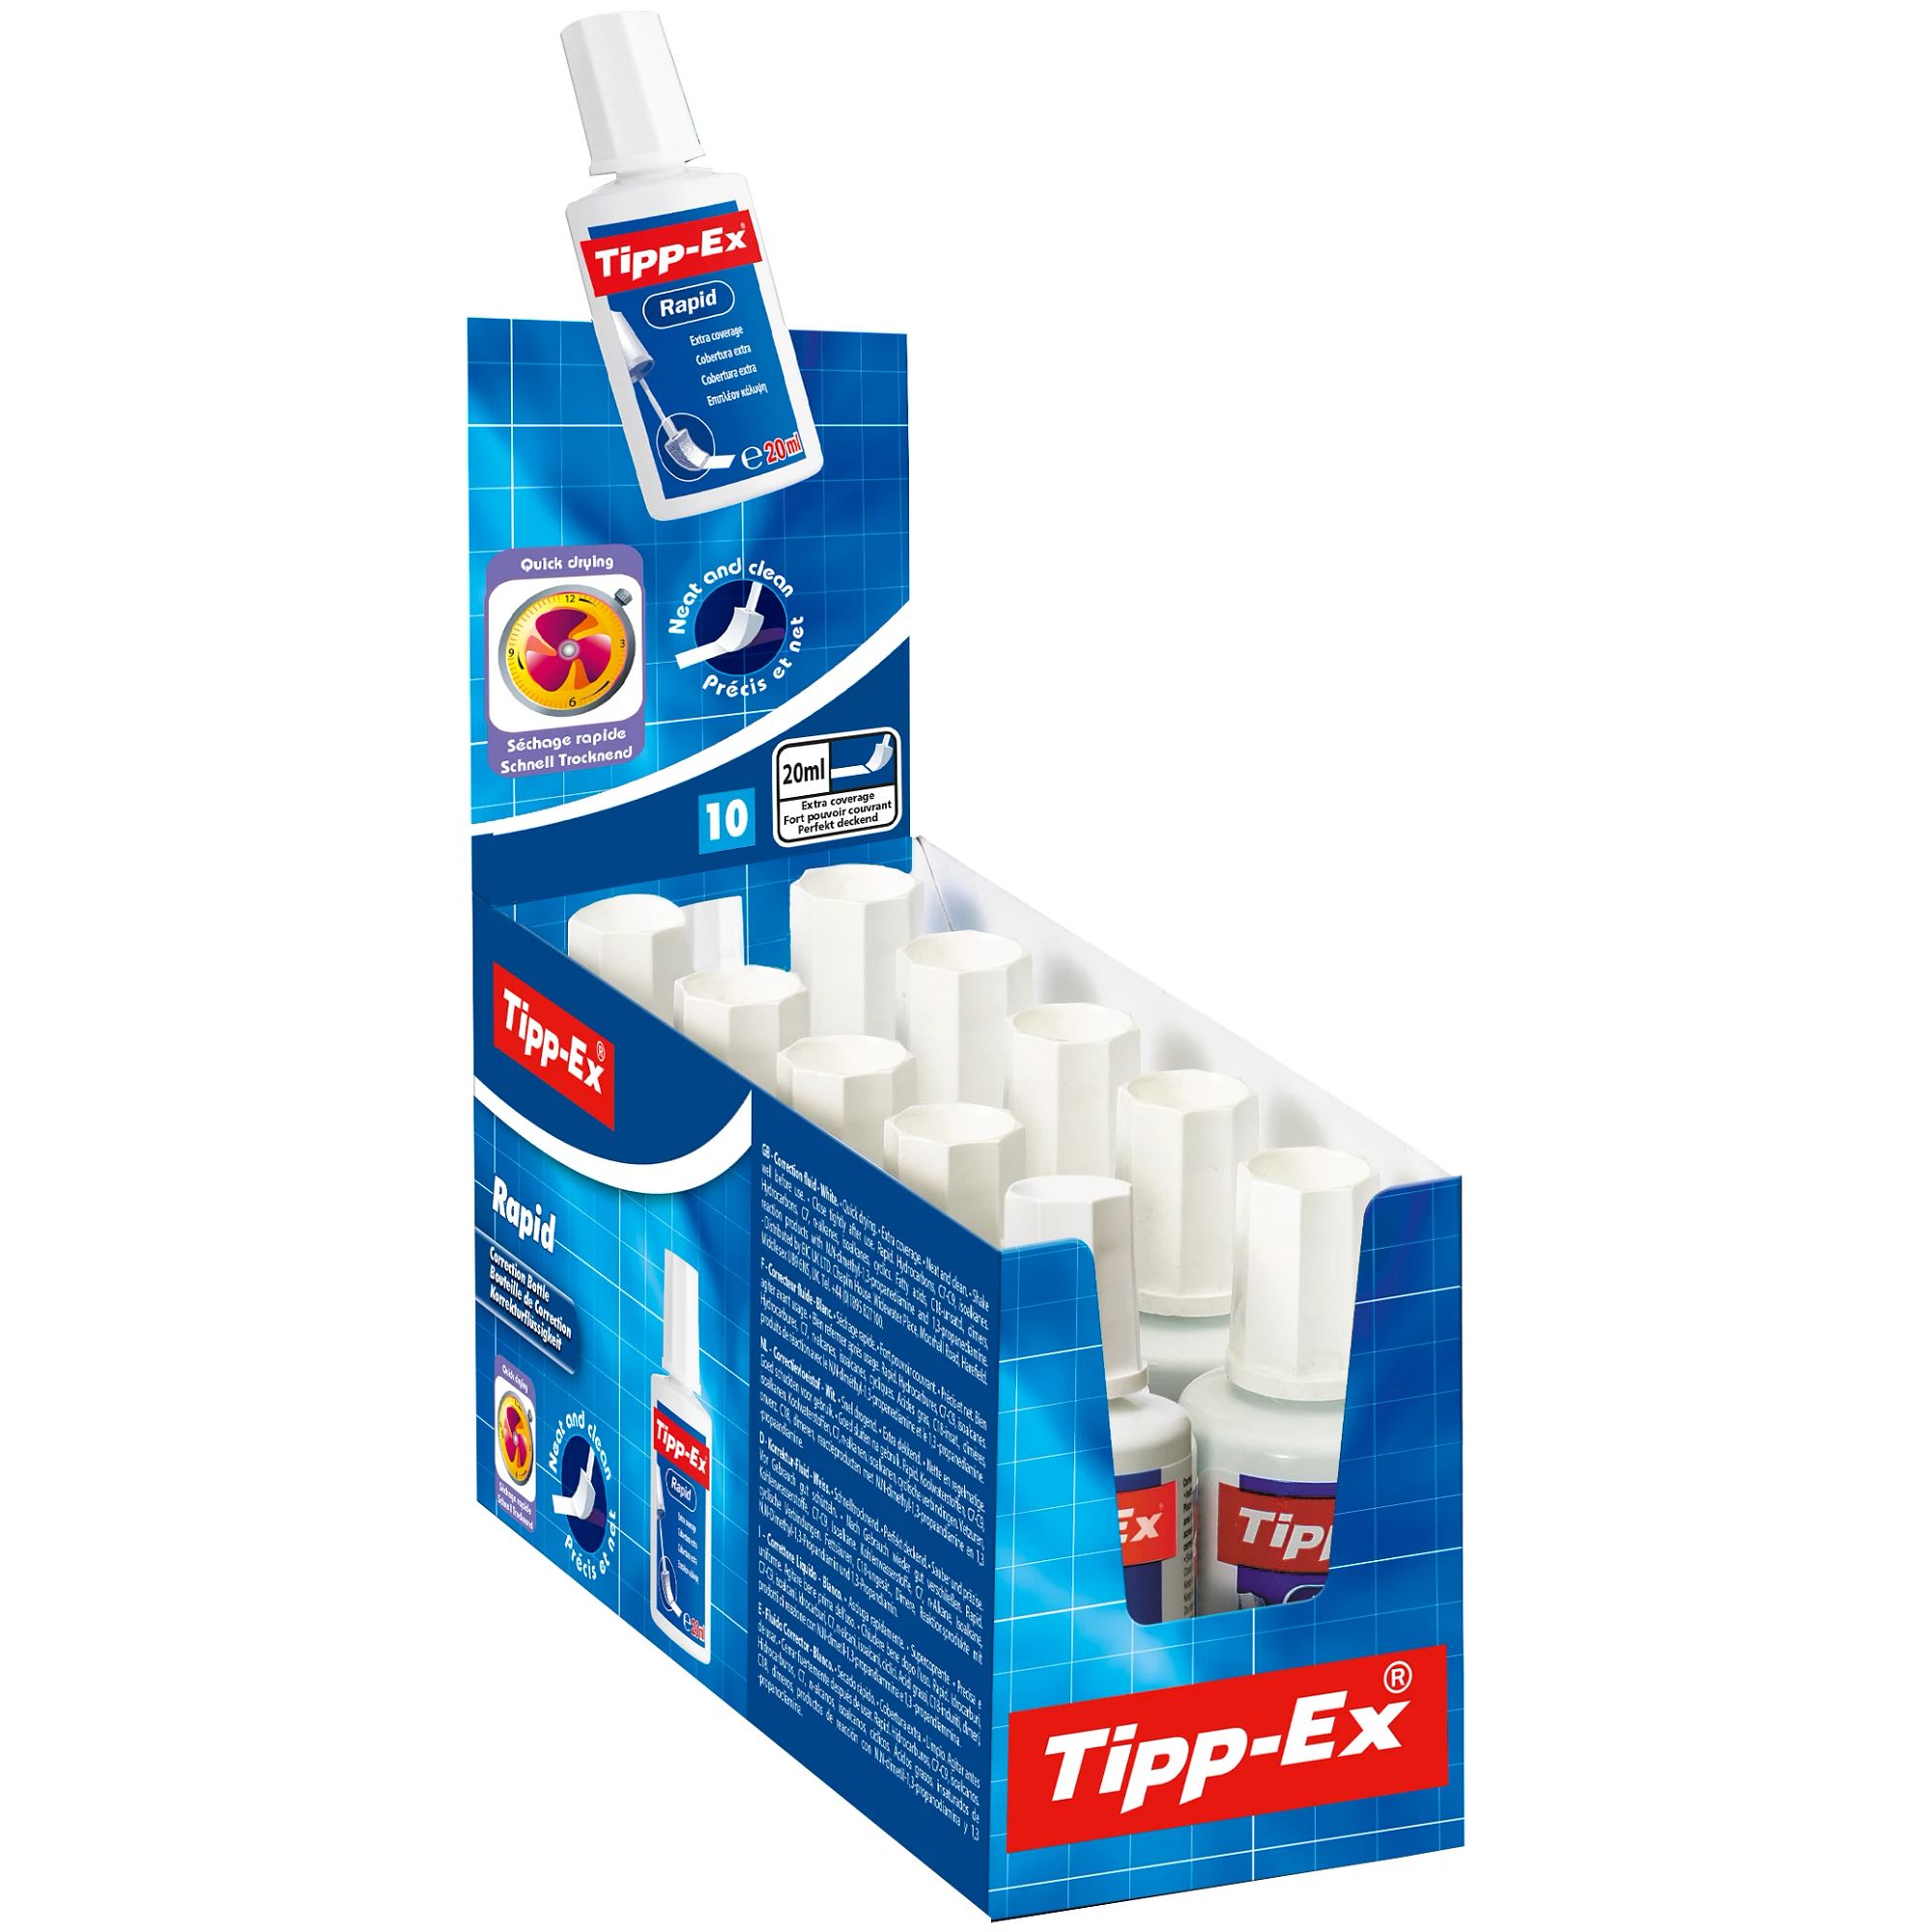 Tipp-Ex Rapid Top-Quality Opaque and Clean Correction Bottle of 20 ml  Liquid- Long-Lasting Product - Pack of 1